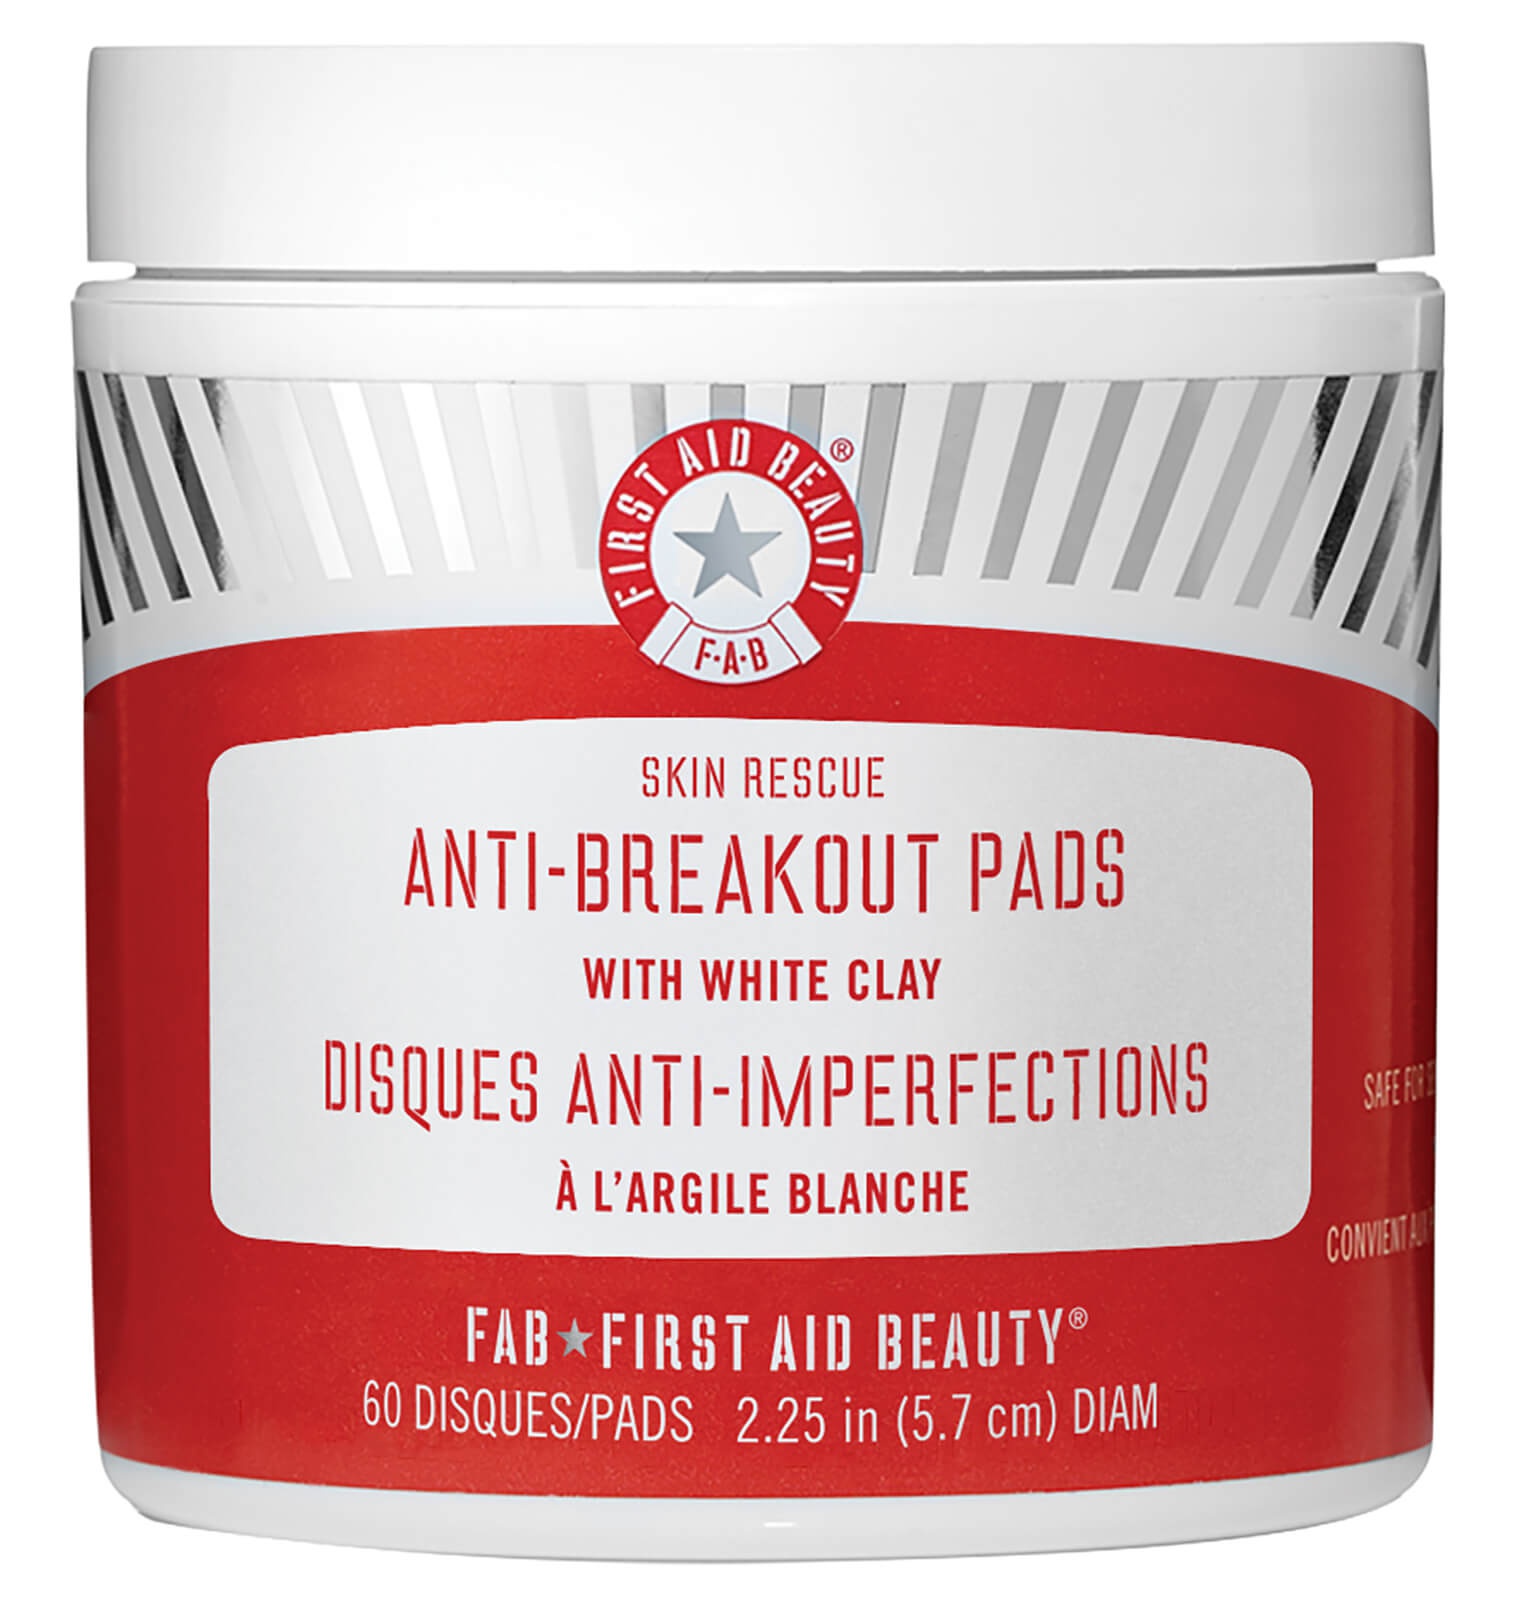 First Aid Beauty Skin Rescue Anti-Breakout Pads With White Clay